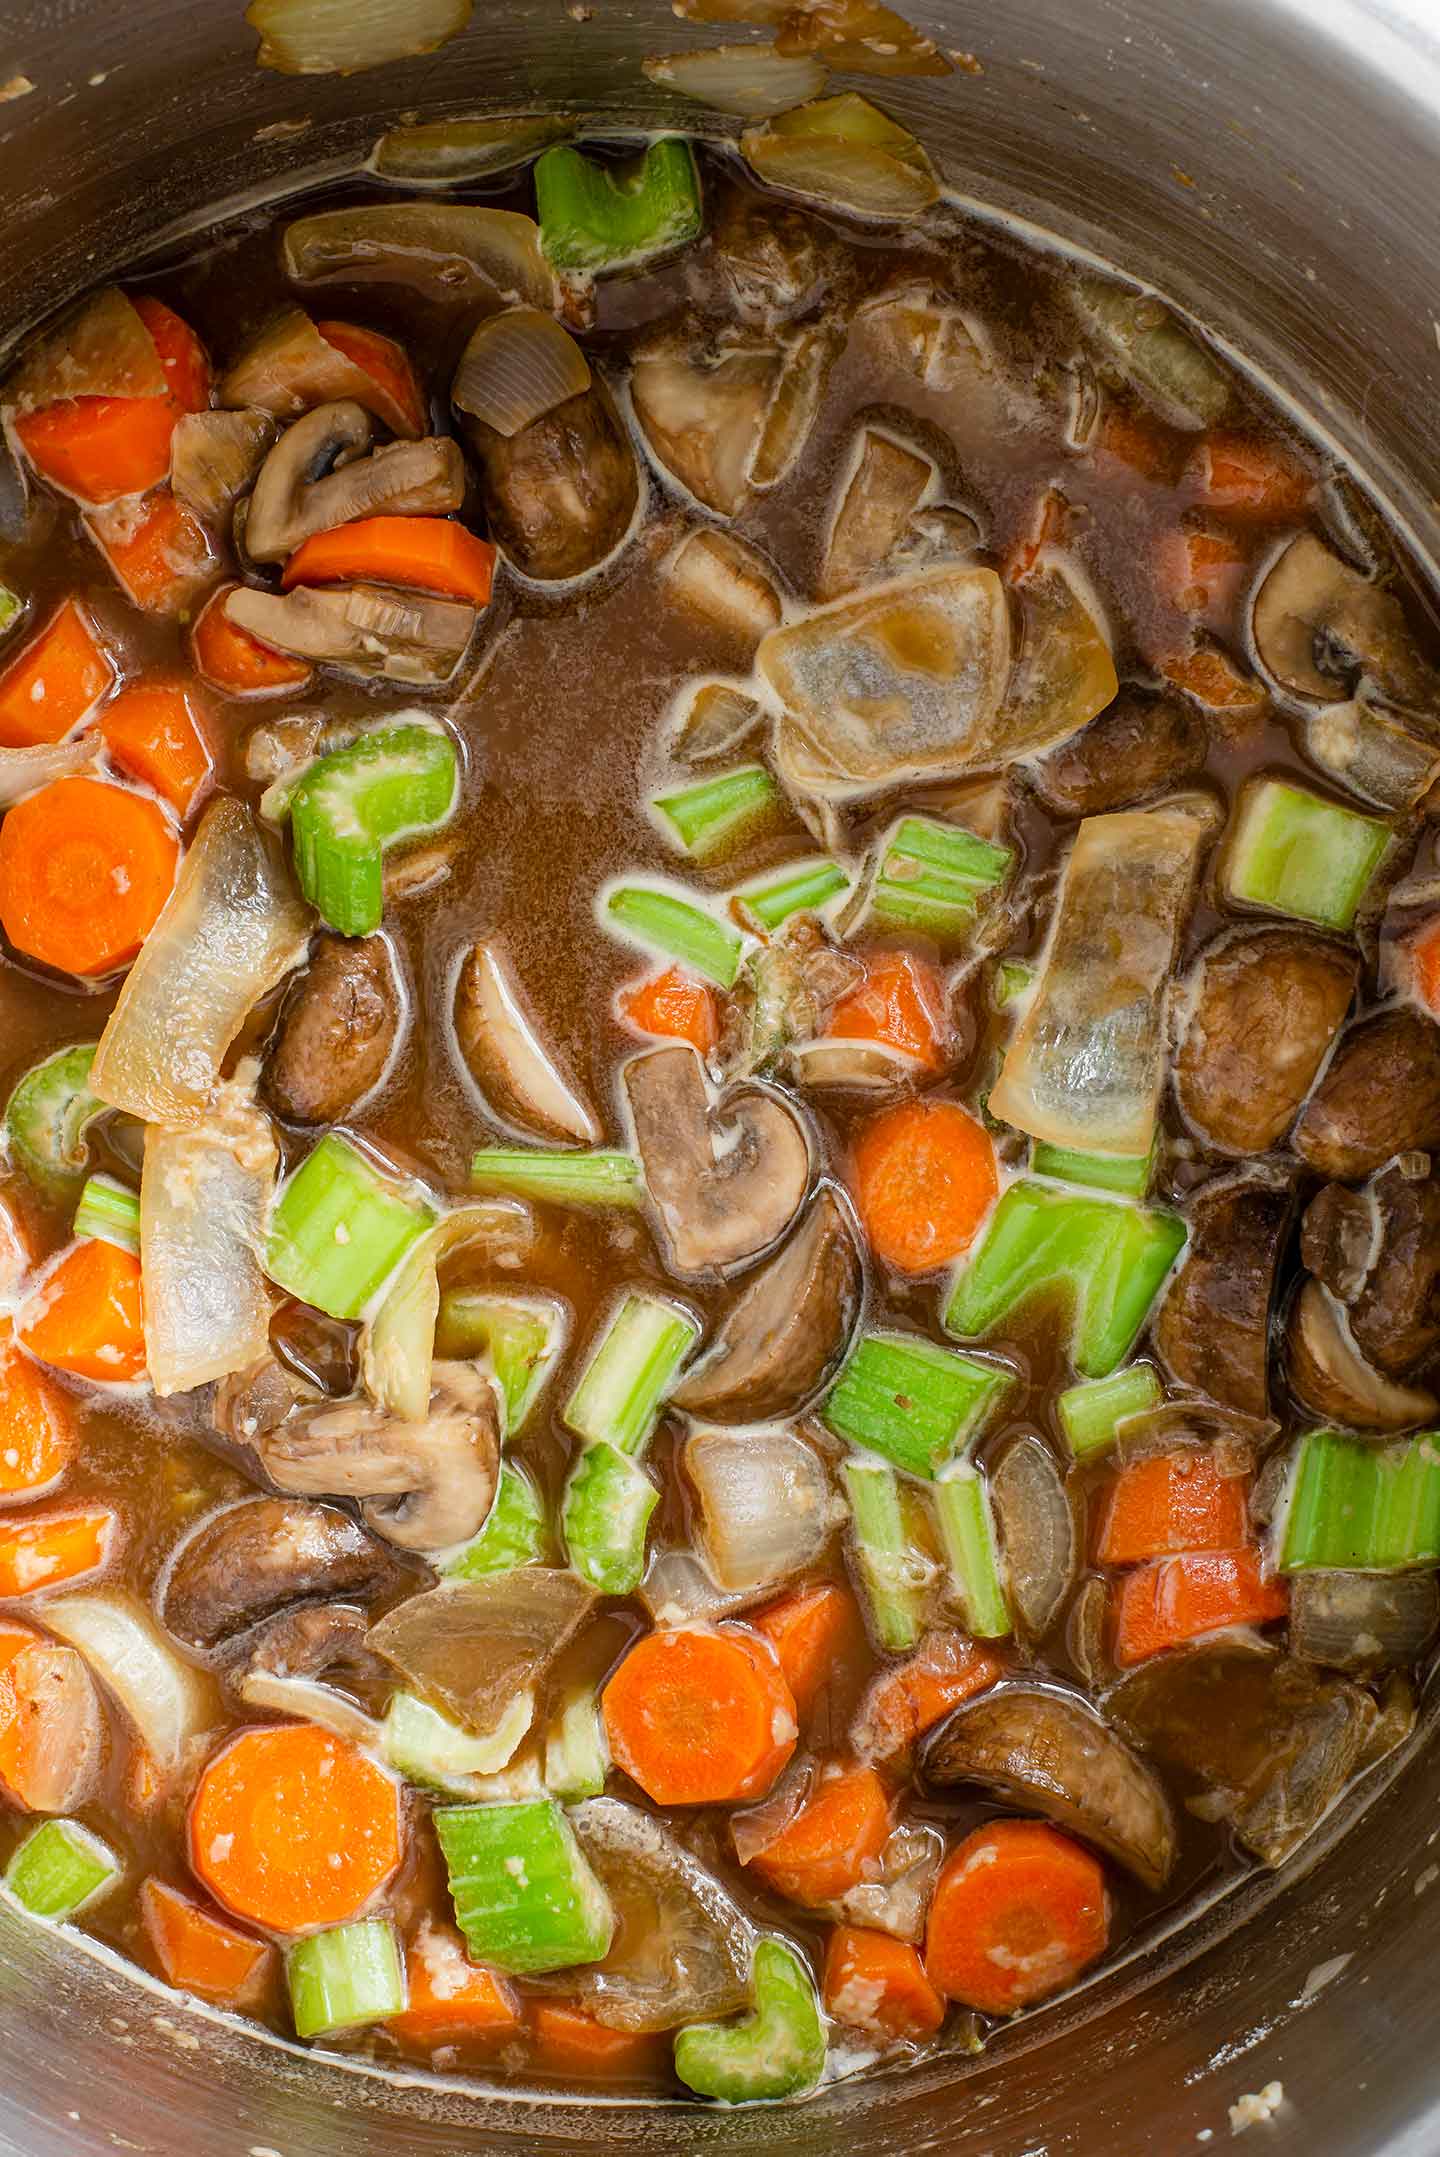 Top down view of Guinness stout added to a pot of chopped vegetables thickened with flour.